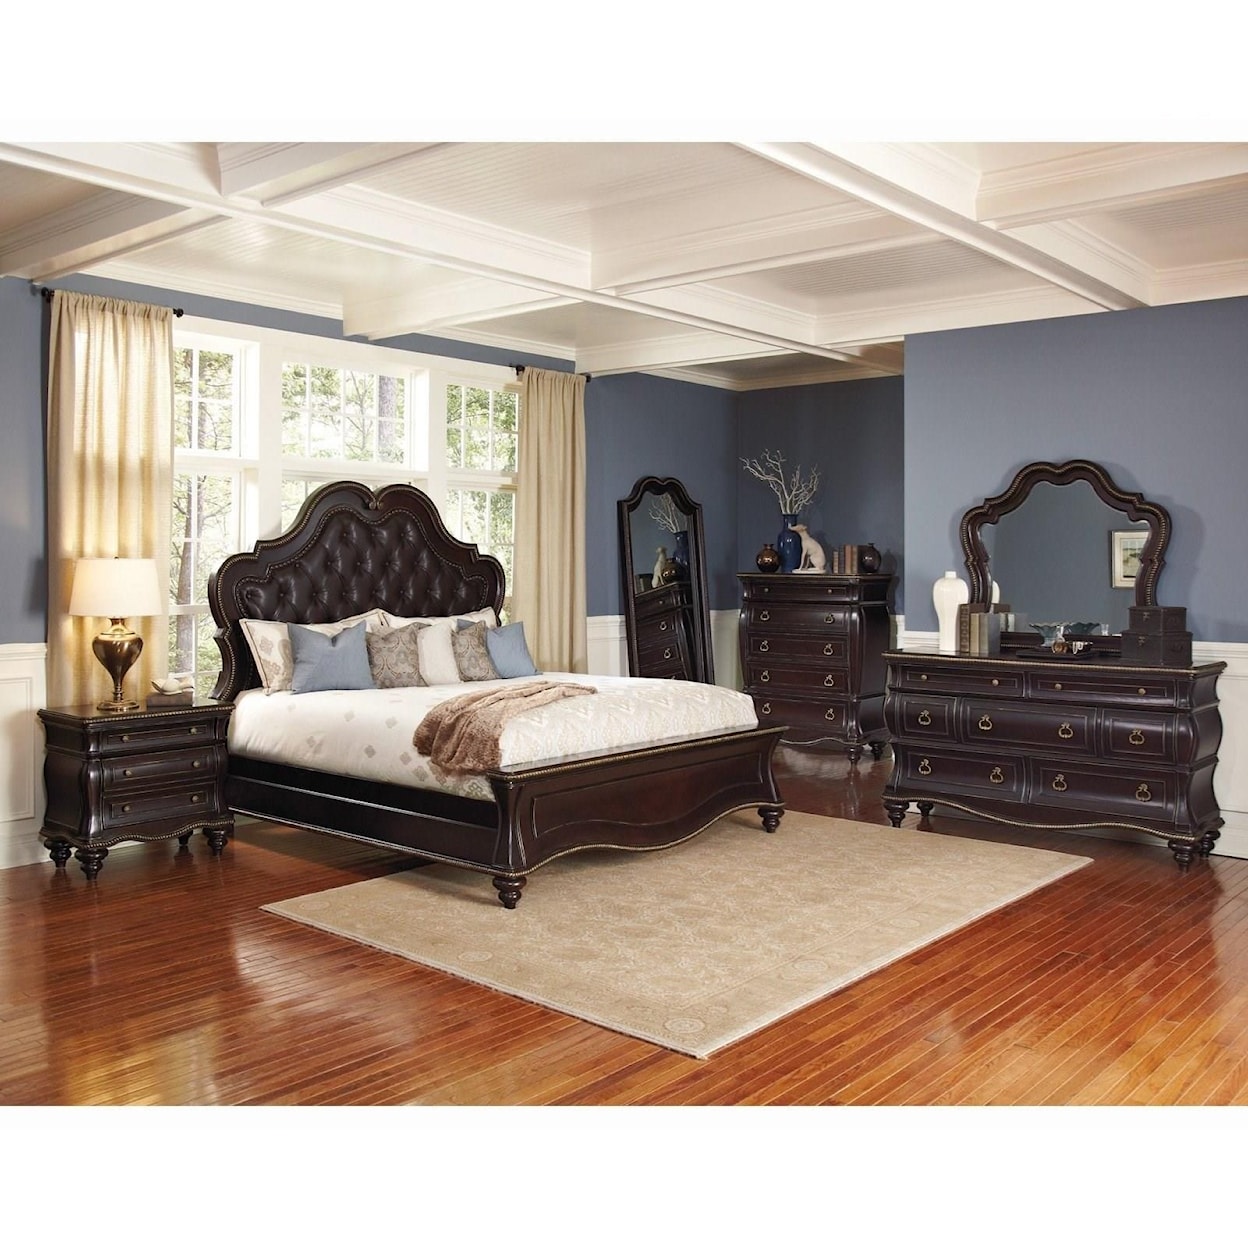 Avalon Furniture Palisades Queen Bed